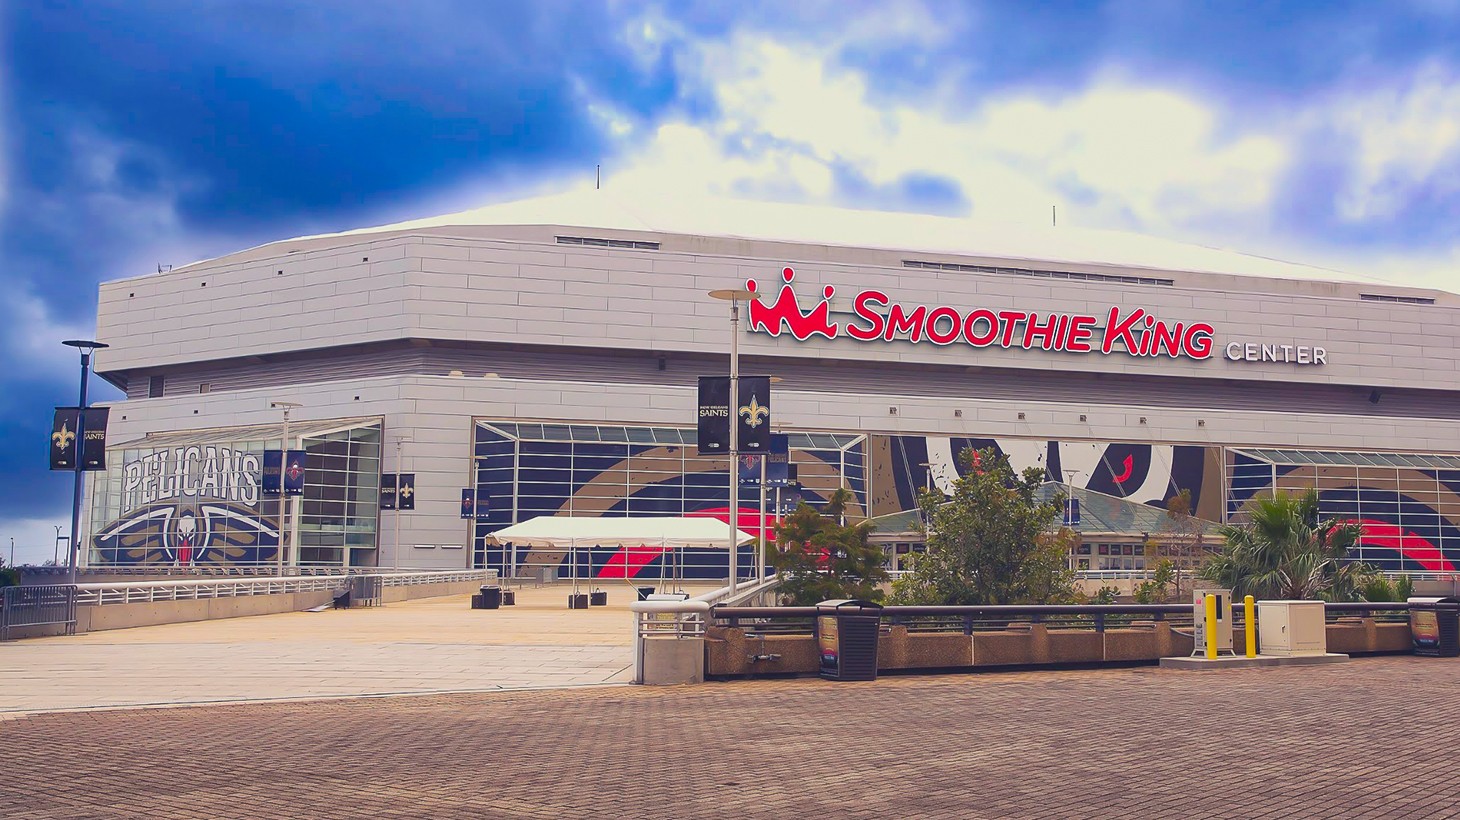 Smoothie King Center: Home of the New Orleans Pelicans - The